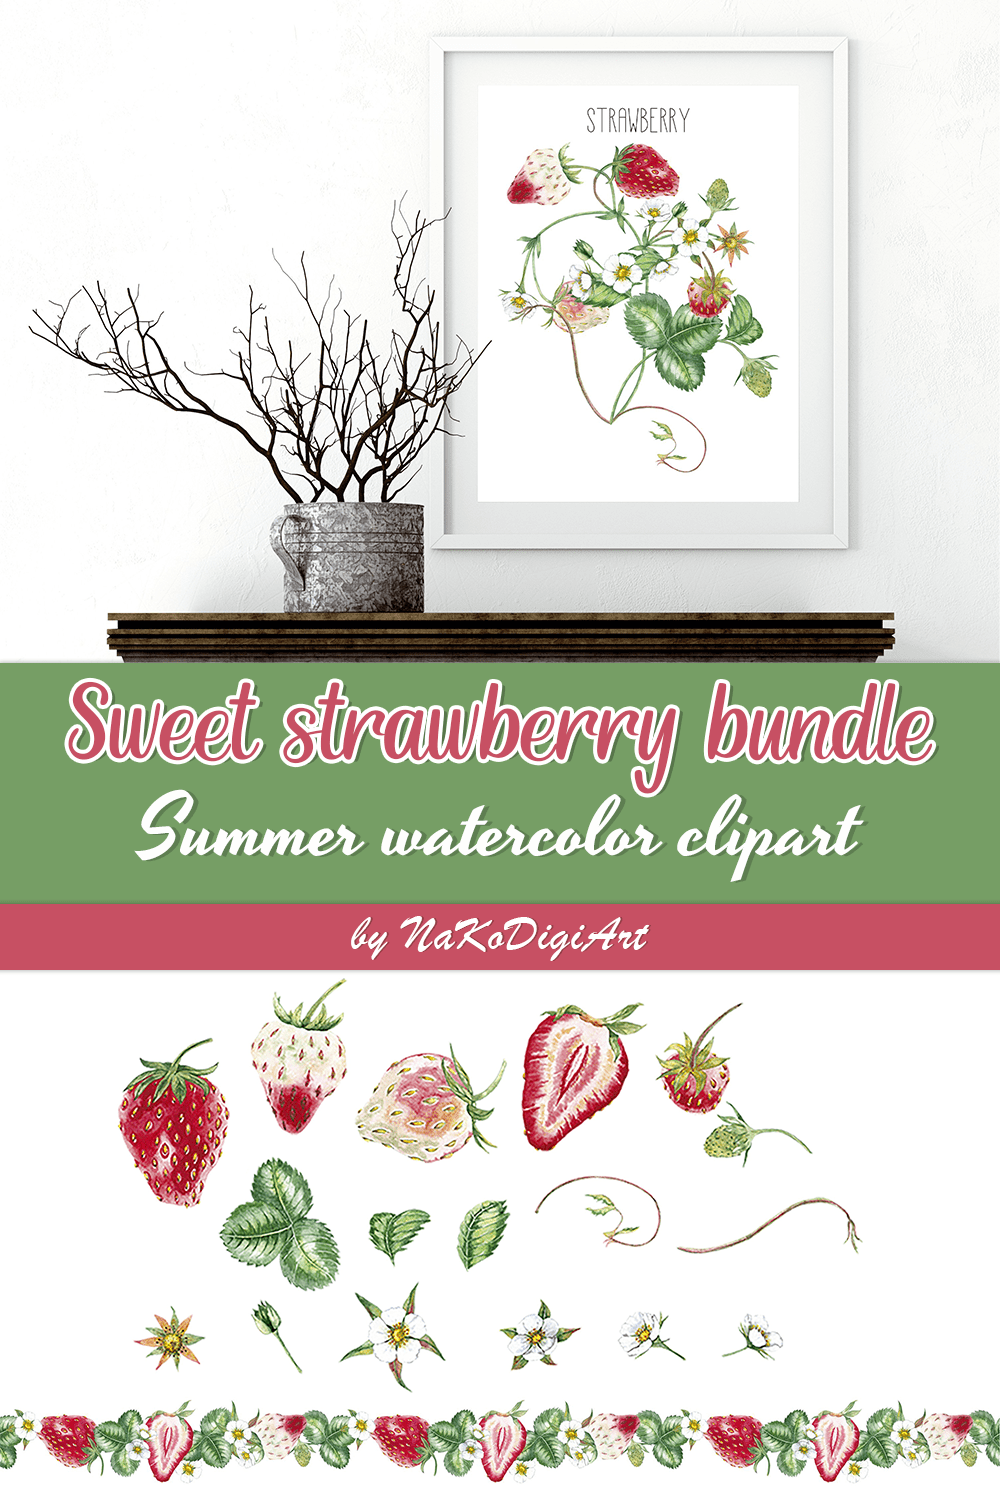 Sweet Strawberry Bundle - pinterest image preview.